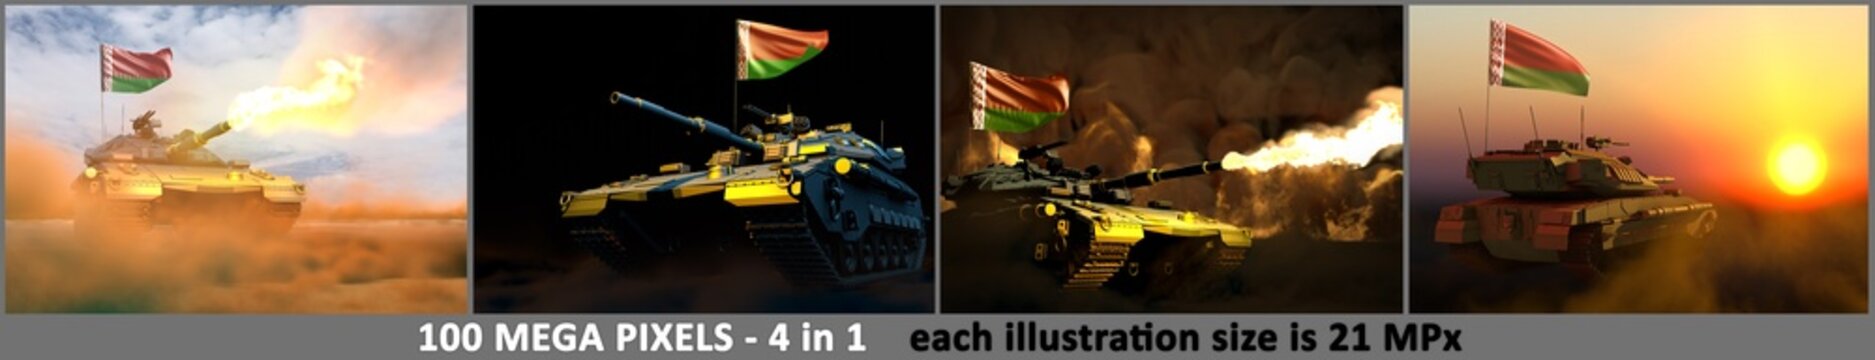 Belarus army concept - 4 highly detailed images of tank with not real design with Belarus flag and free place for your text, military 3D Illustration